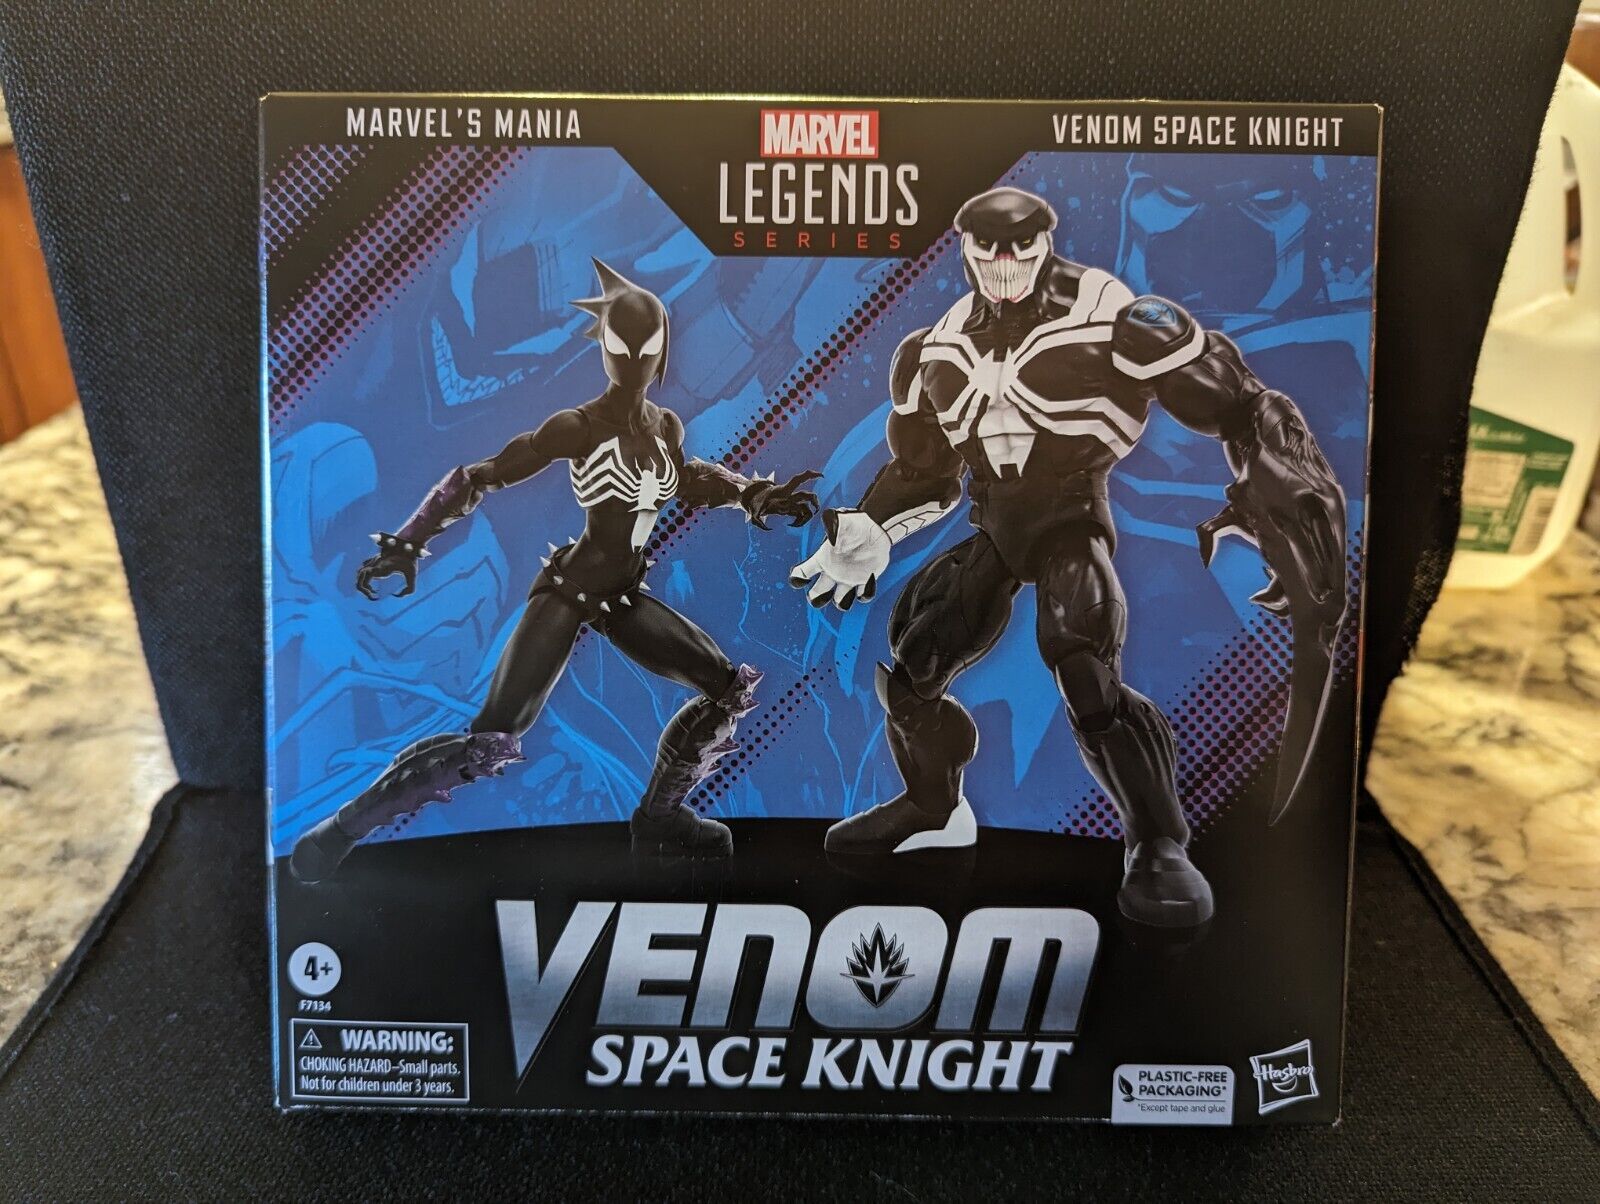 Marvel Legends Series Venom Space Knight and Marvel's Mania (In Stock)